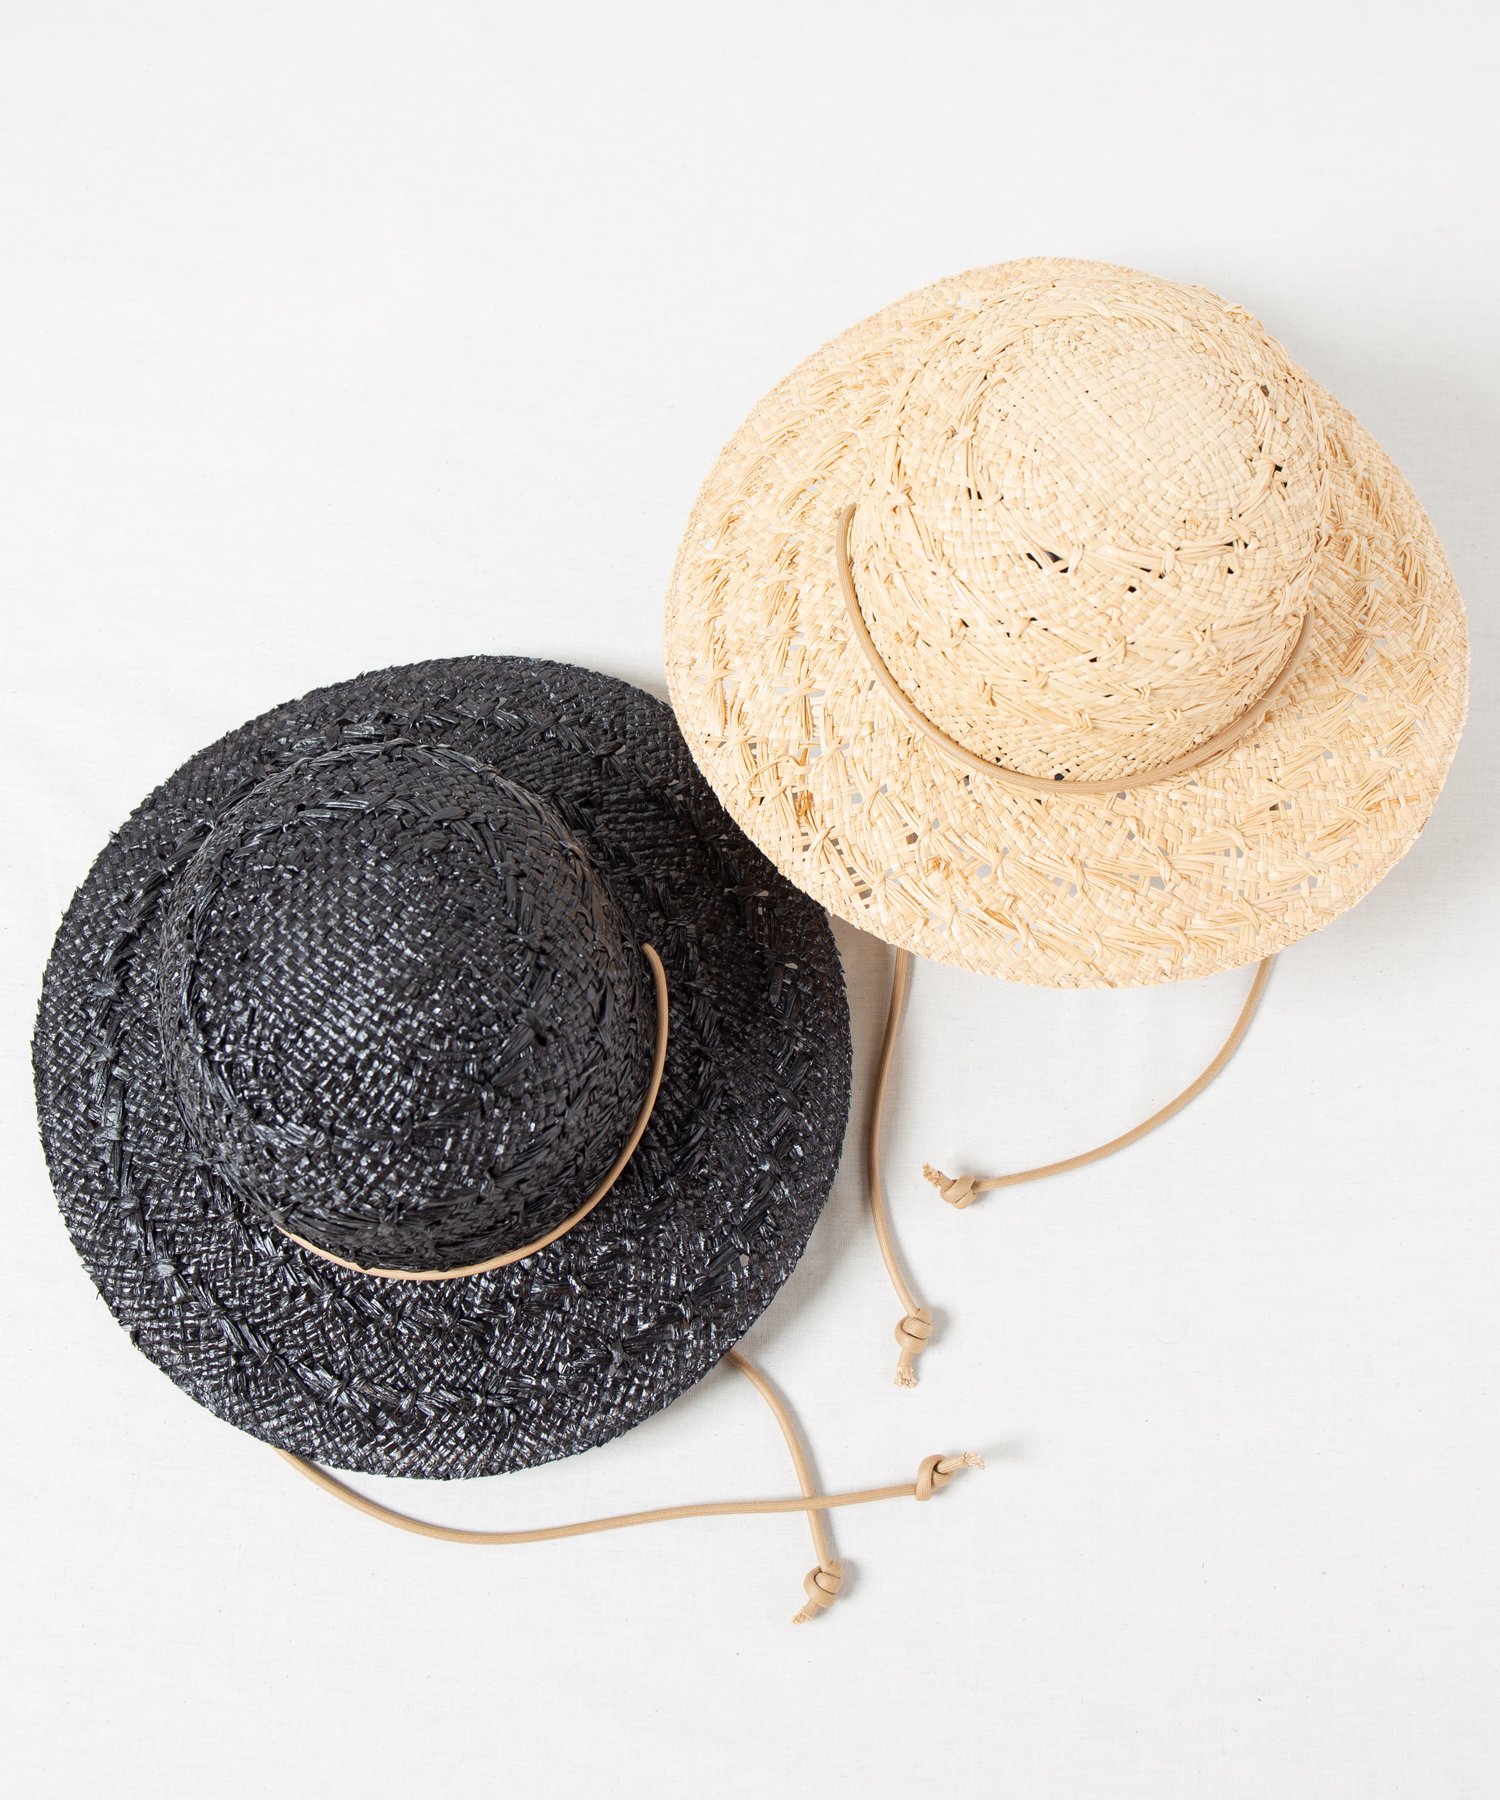 <img class='new_mark_img1' src='https://img.shop-pro.jp/img/new/icons20.gif' style='border:none;display:inline;margin:0px;padding:0px;width:auto;' />Racal Patterned Raffia Hat HT002 レイズストア限定 柄編みラフィアハット